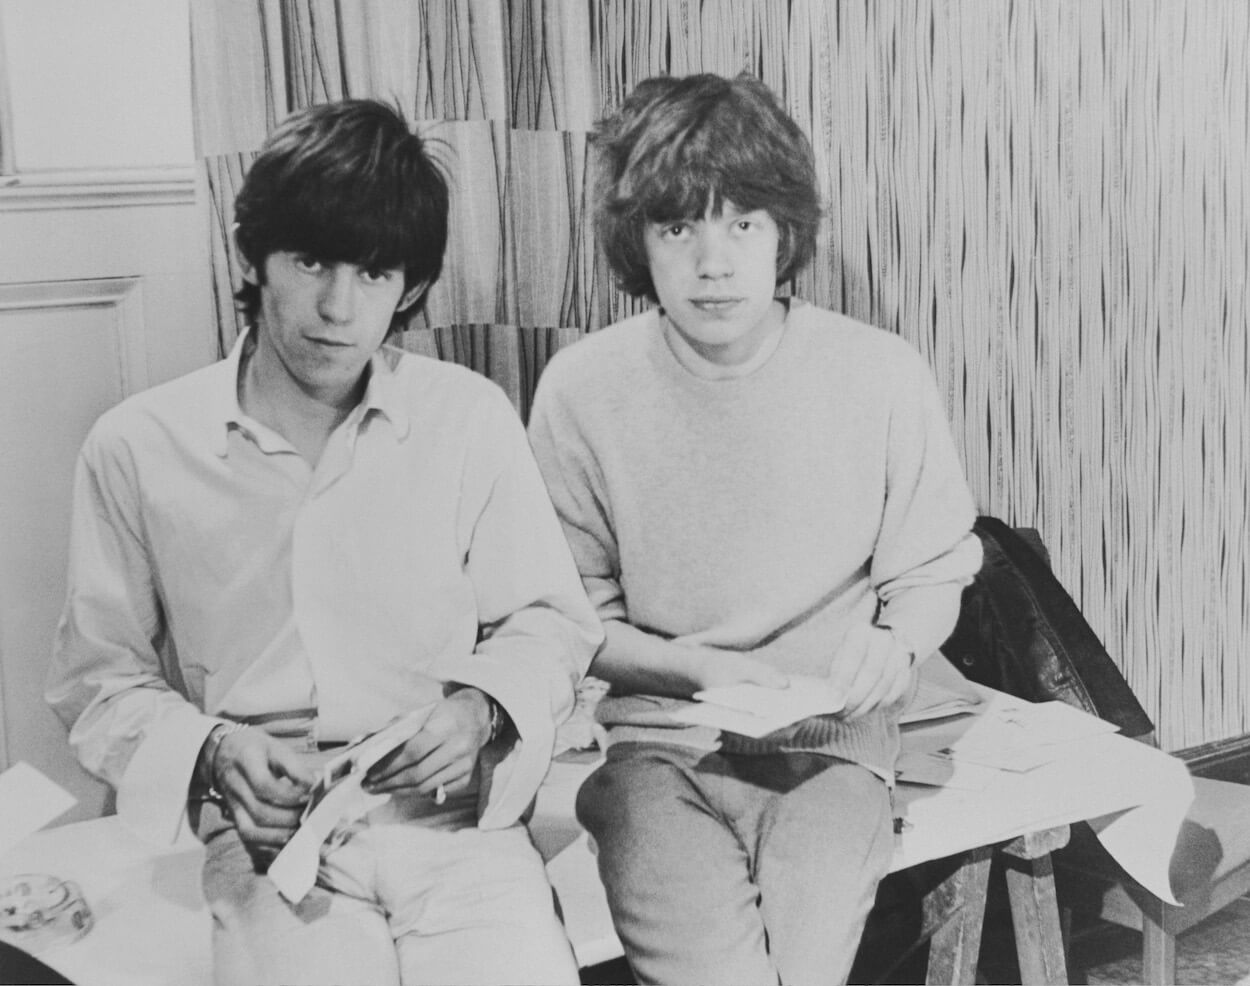 Rolling Stones members Keith Richards (left) and Mick Jagger sitting on a table and opening fan mail in 1963.